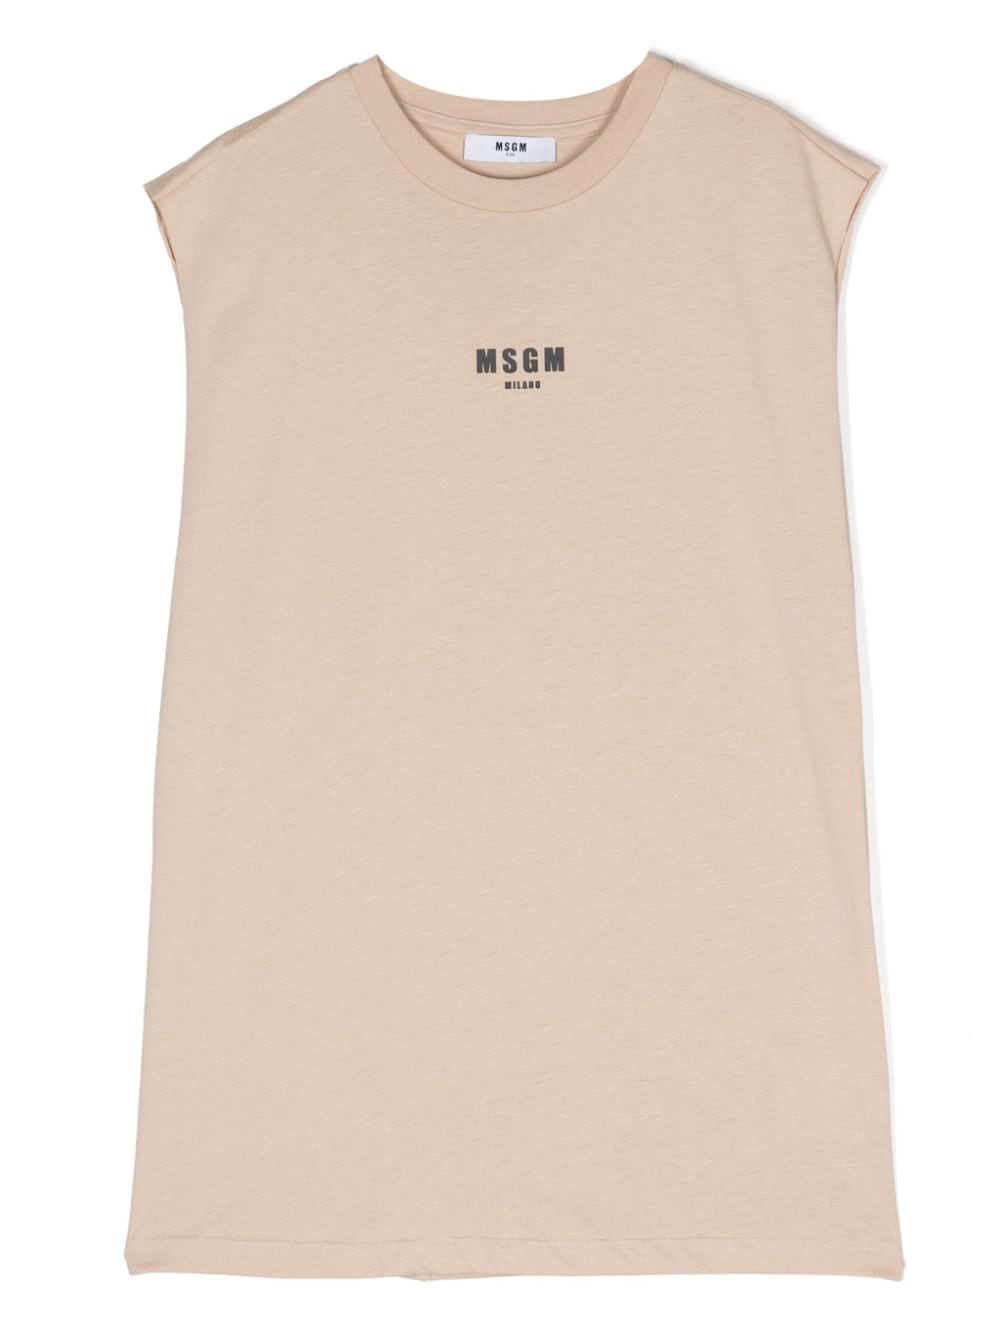 Beige dress for girls with logo